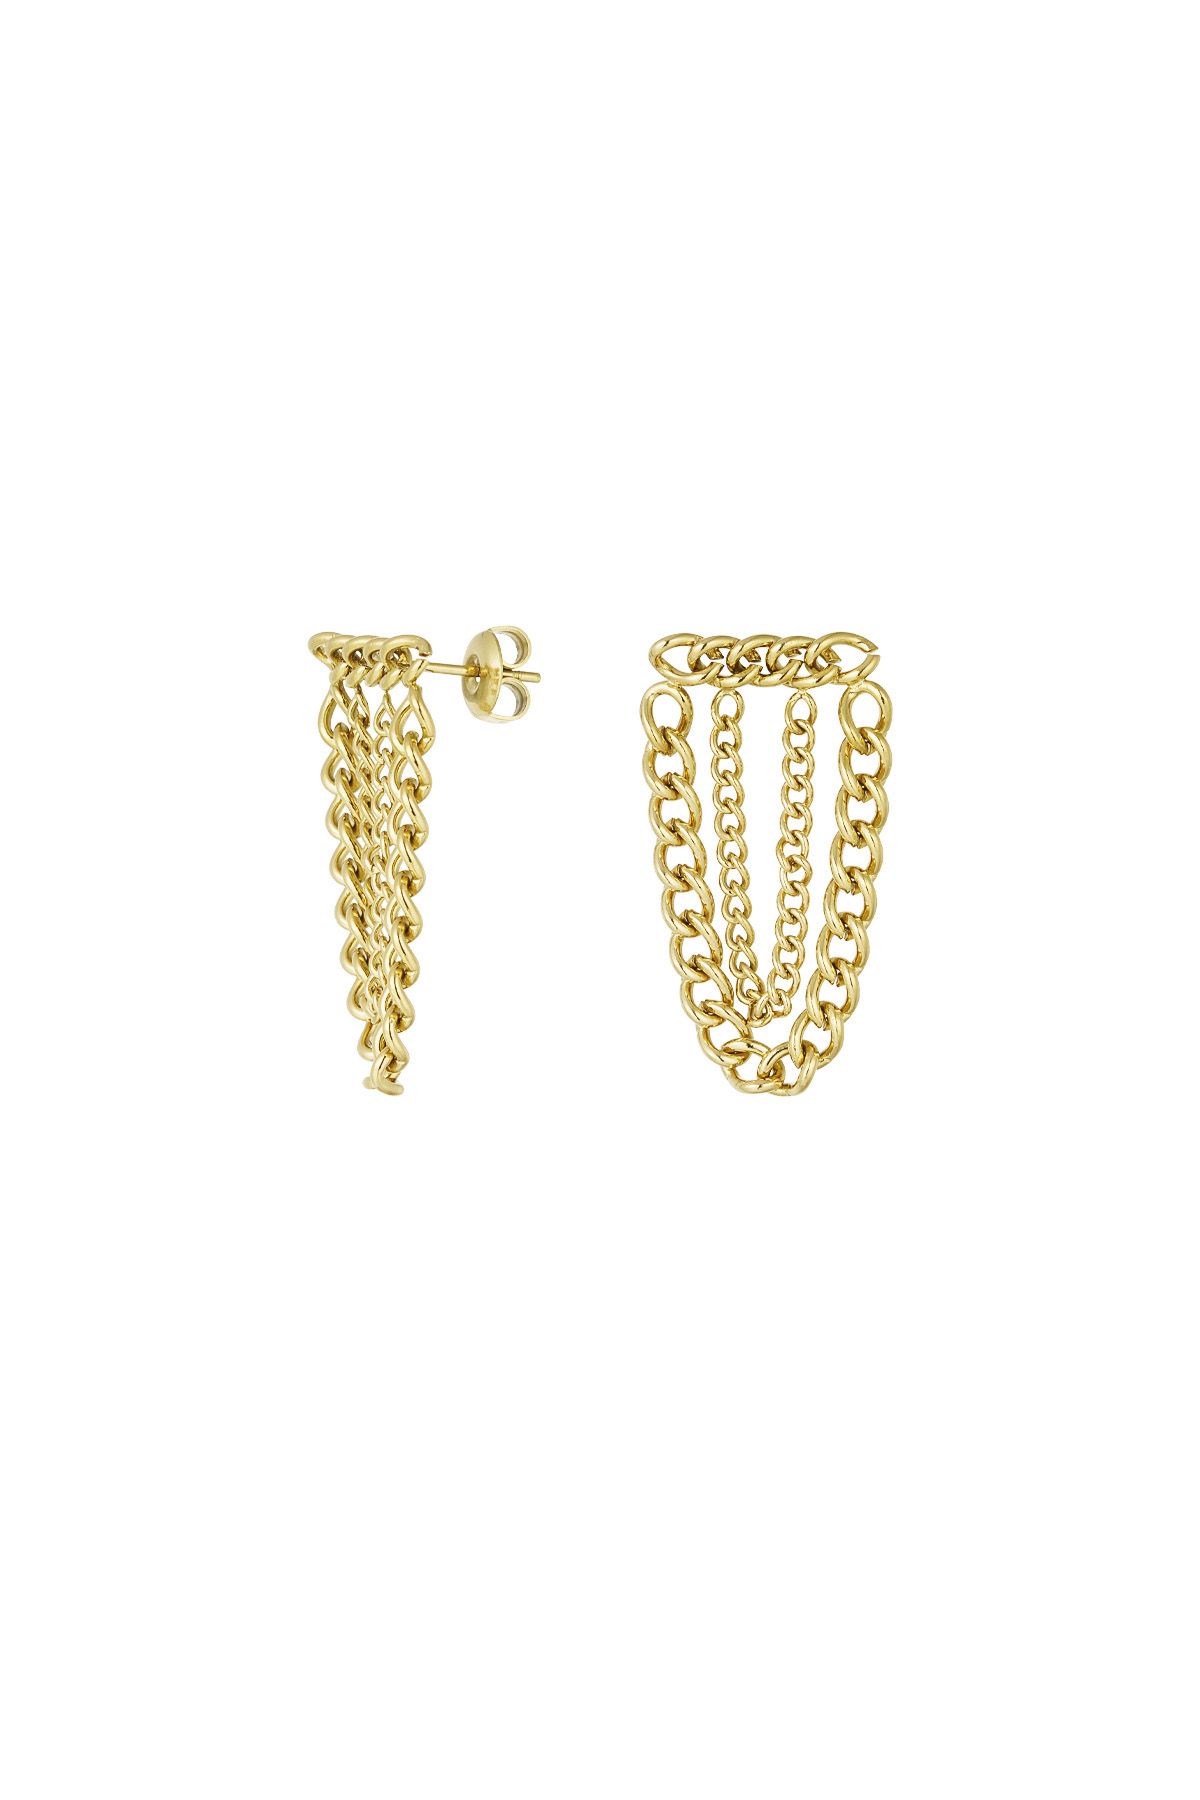 Earrings chain all the way - gold h5 